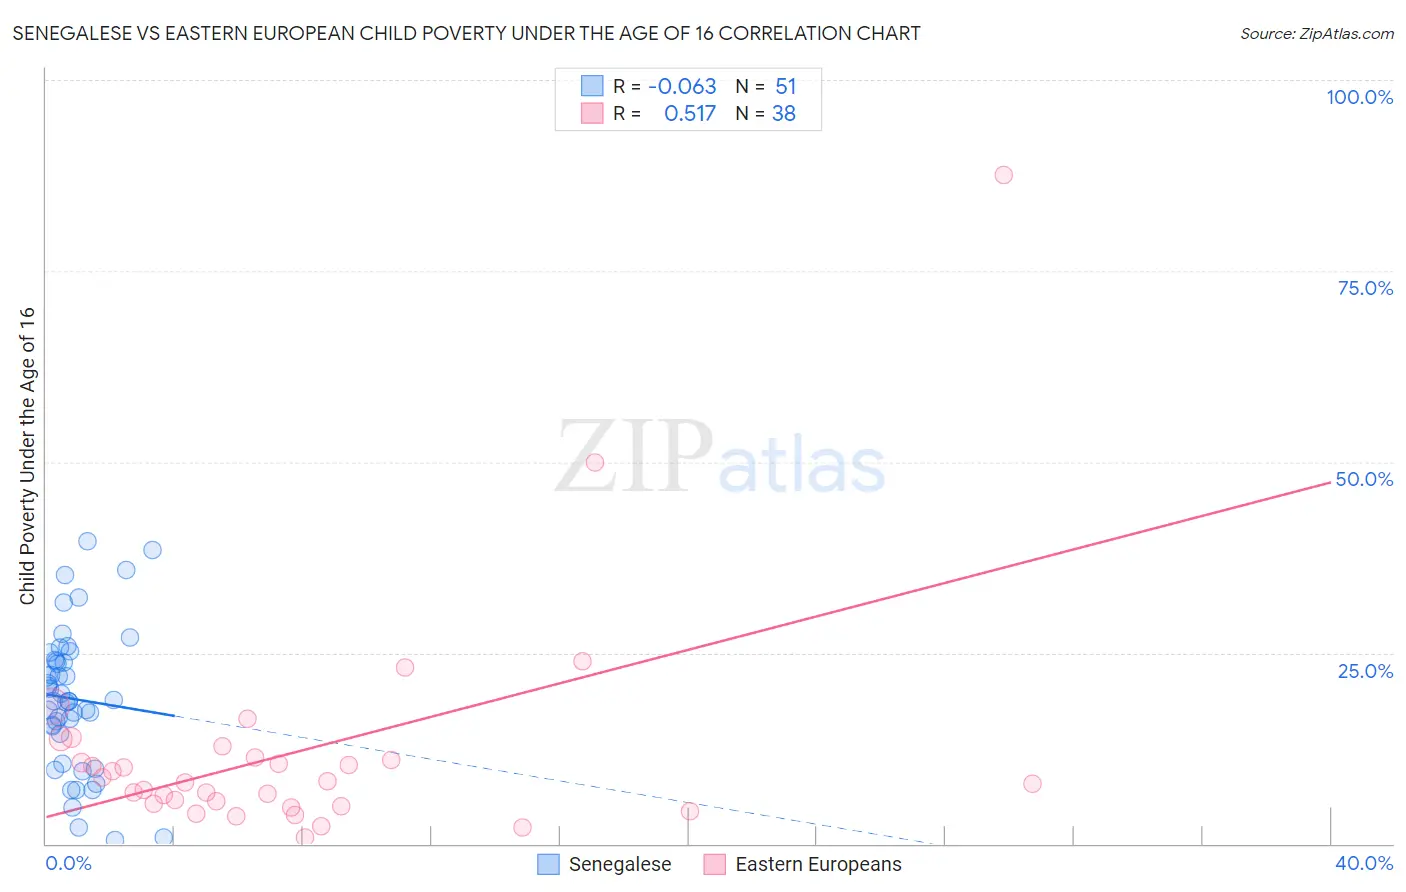 Senegalese vs Eastern European Child Poverty Under the Age of 16